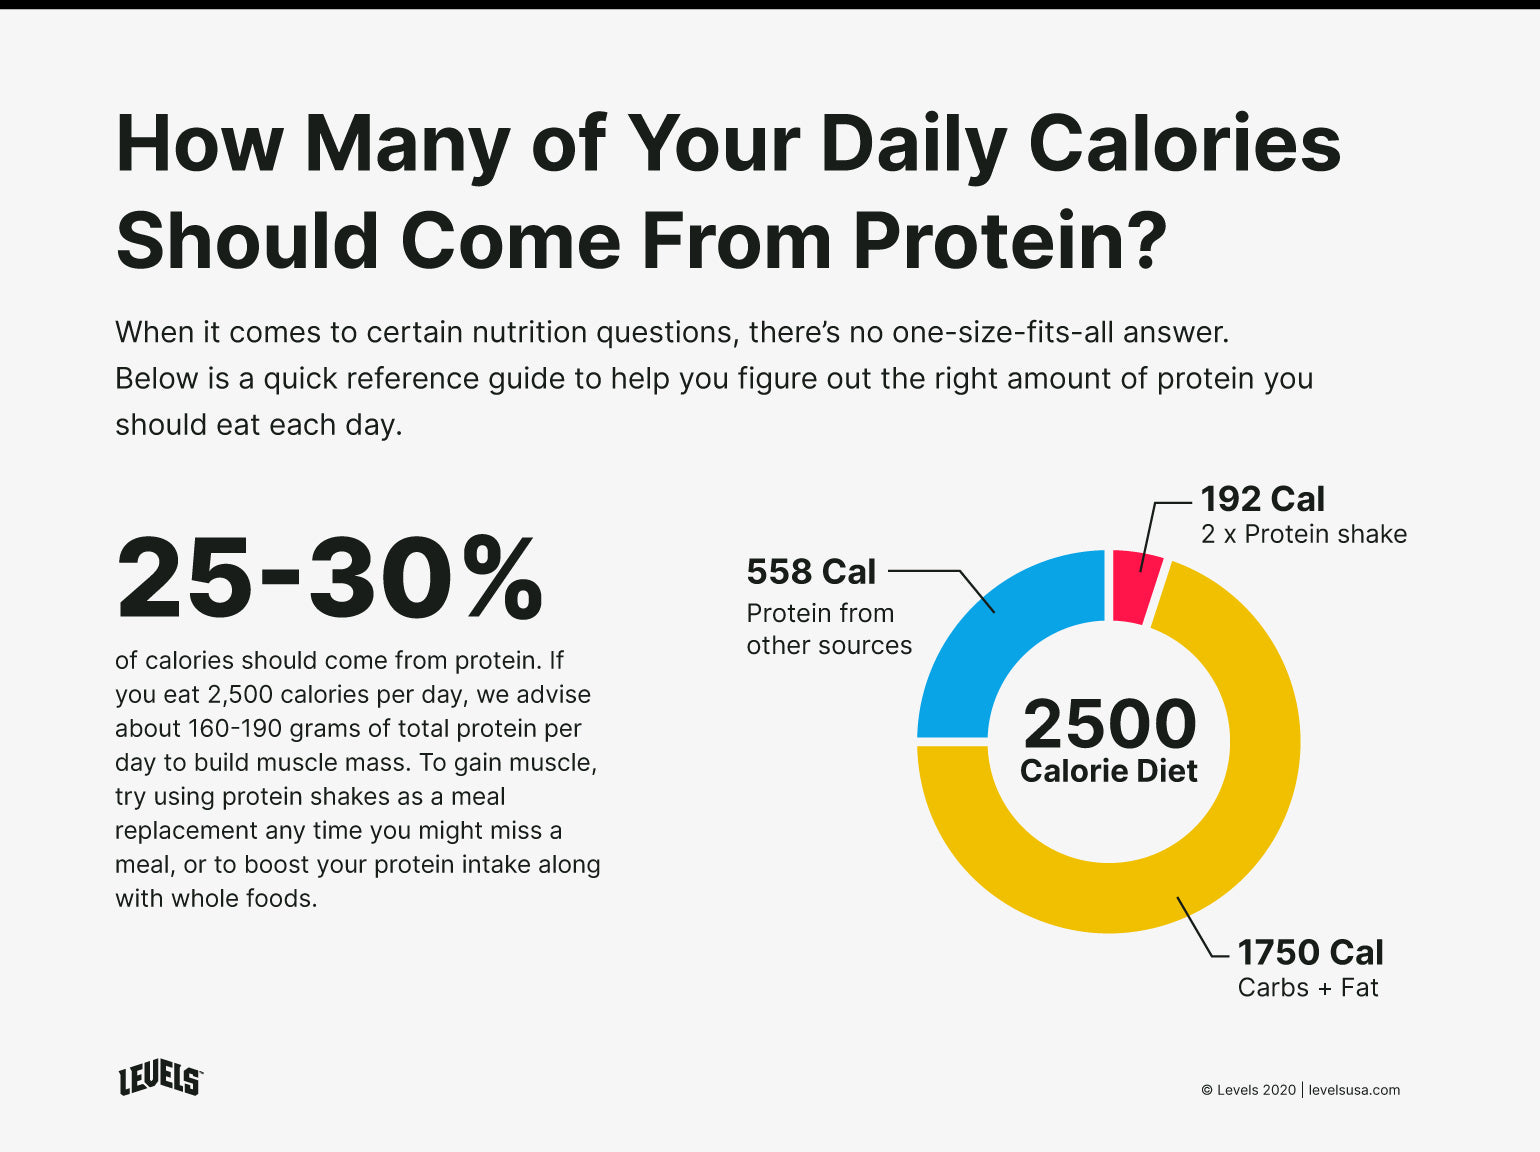 How Many of Your Daily Calories Should Come From Protein - Infographic